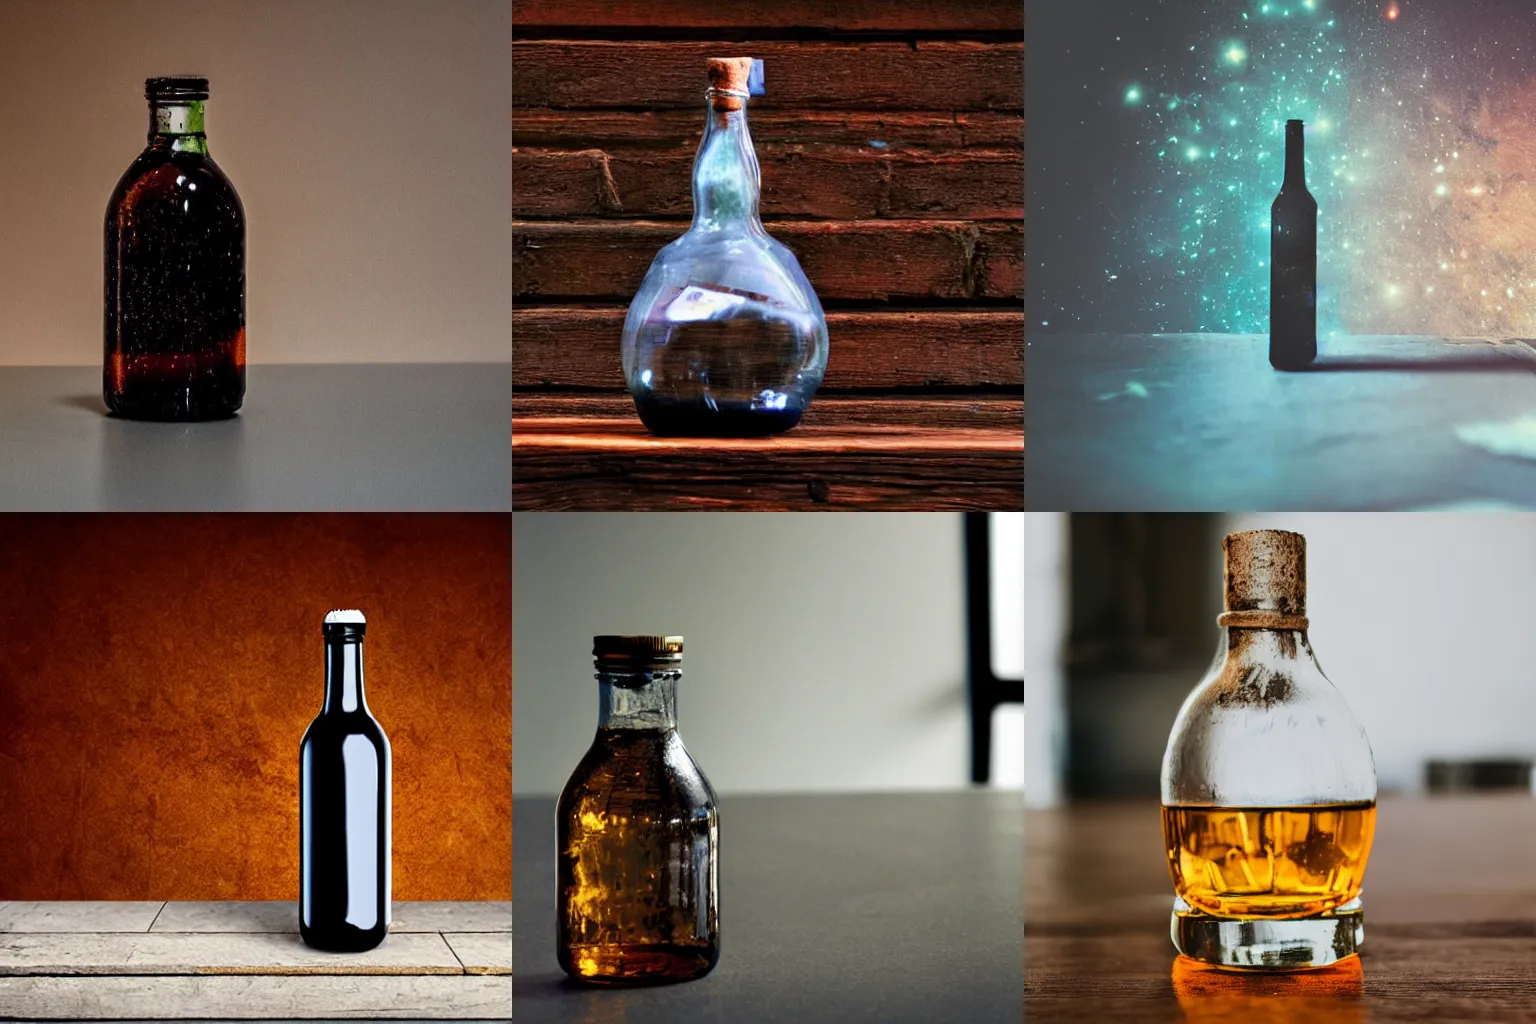 Prompt: there is a glass bottle sitting on a table, it contains a universe